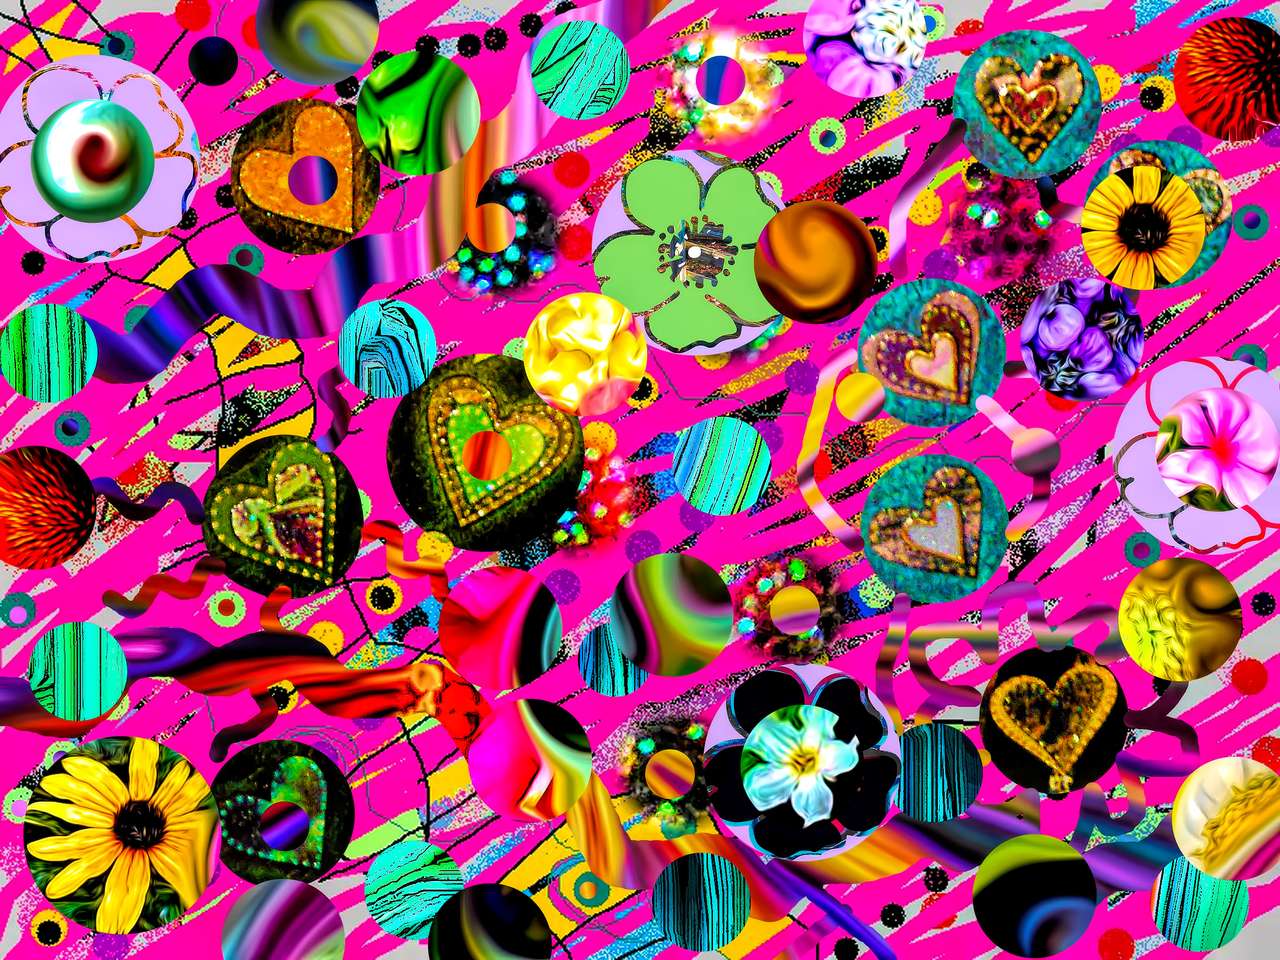 Colorful Chaos online puzzle